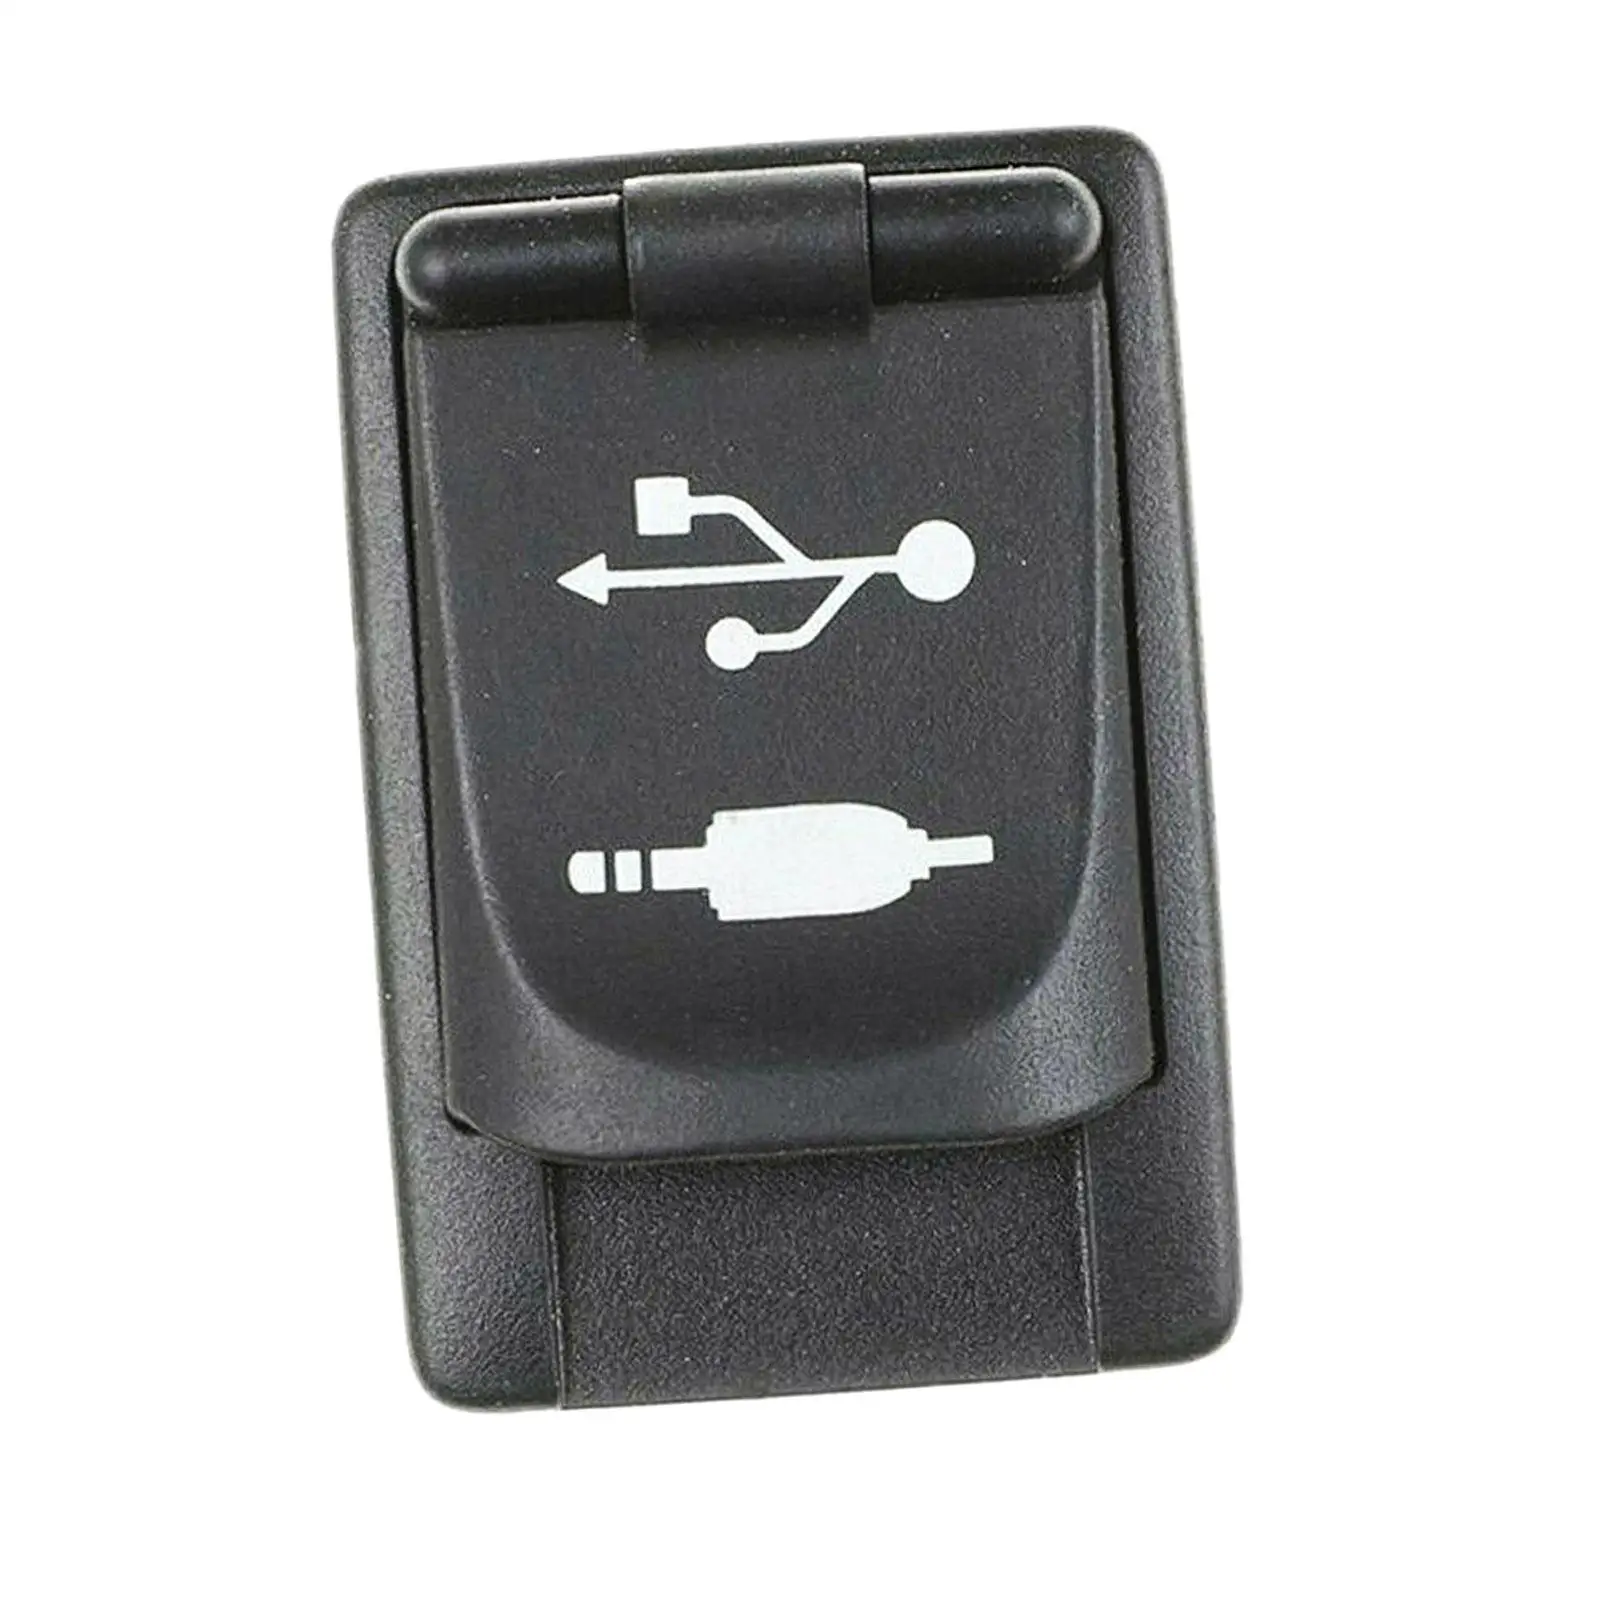 USB Port Adapter Jack Accessories Vehicle Fits for  Sienna Camry